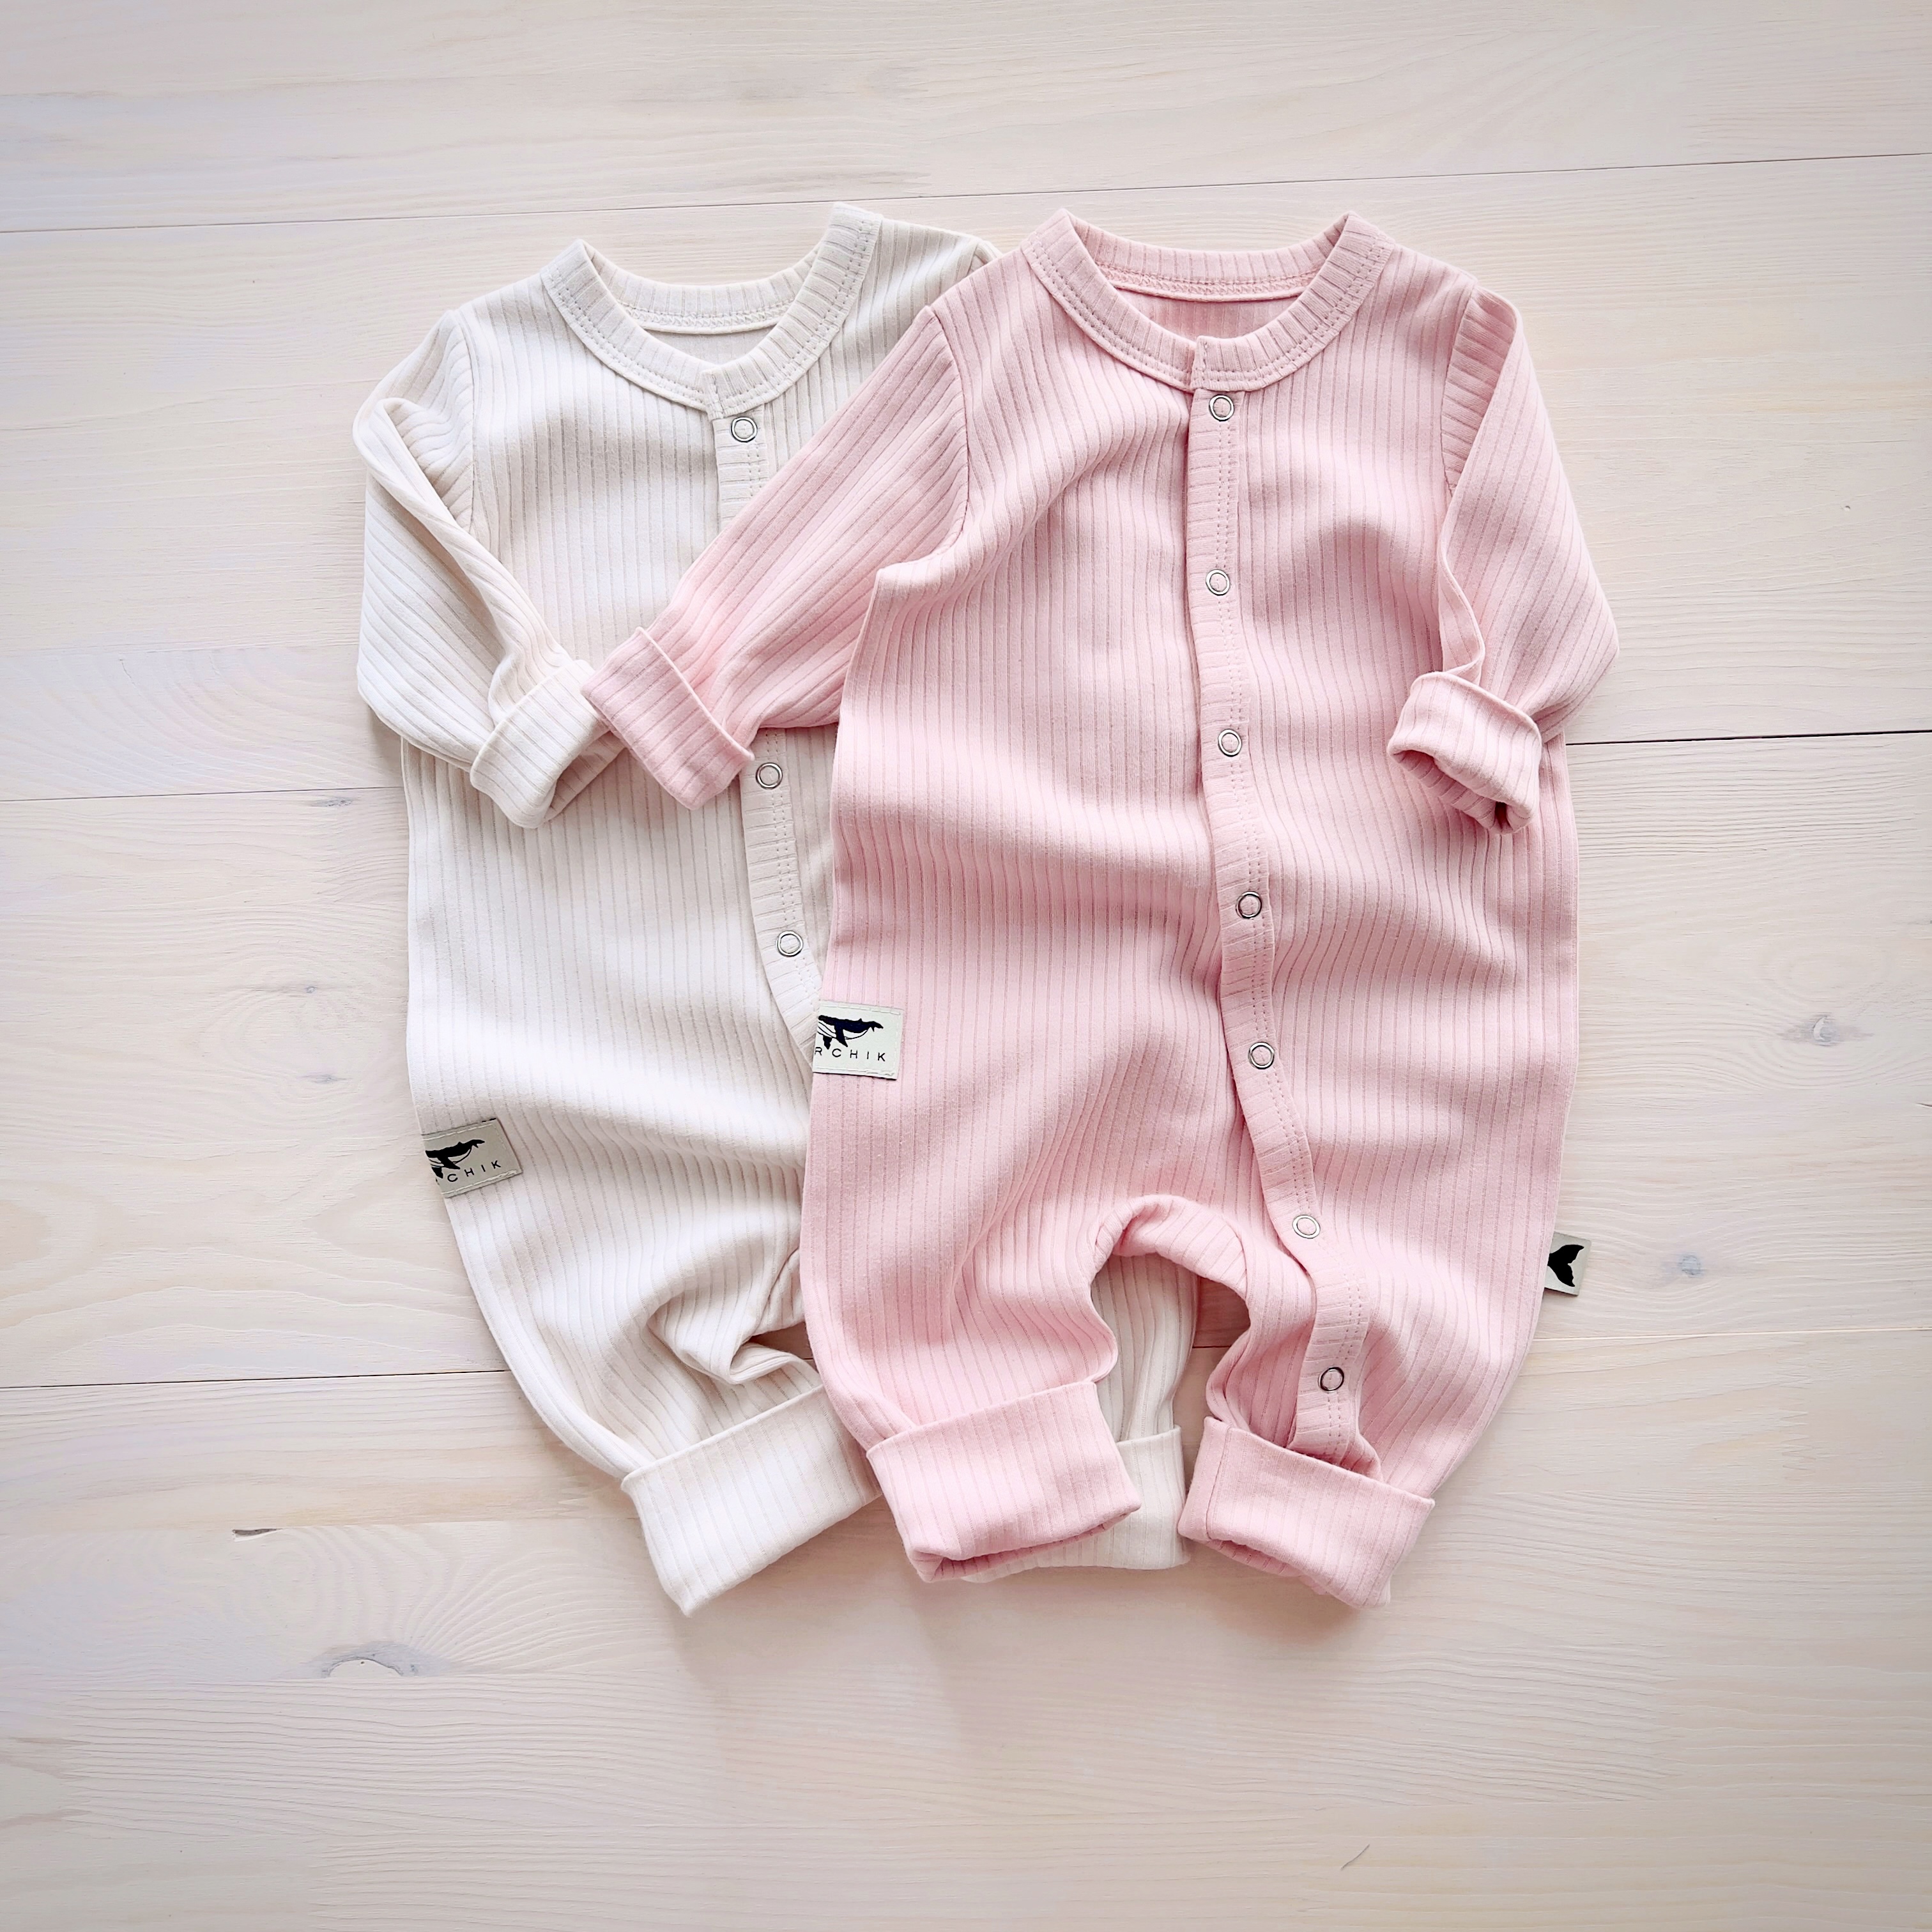 Baby 2 Pack Rompers 